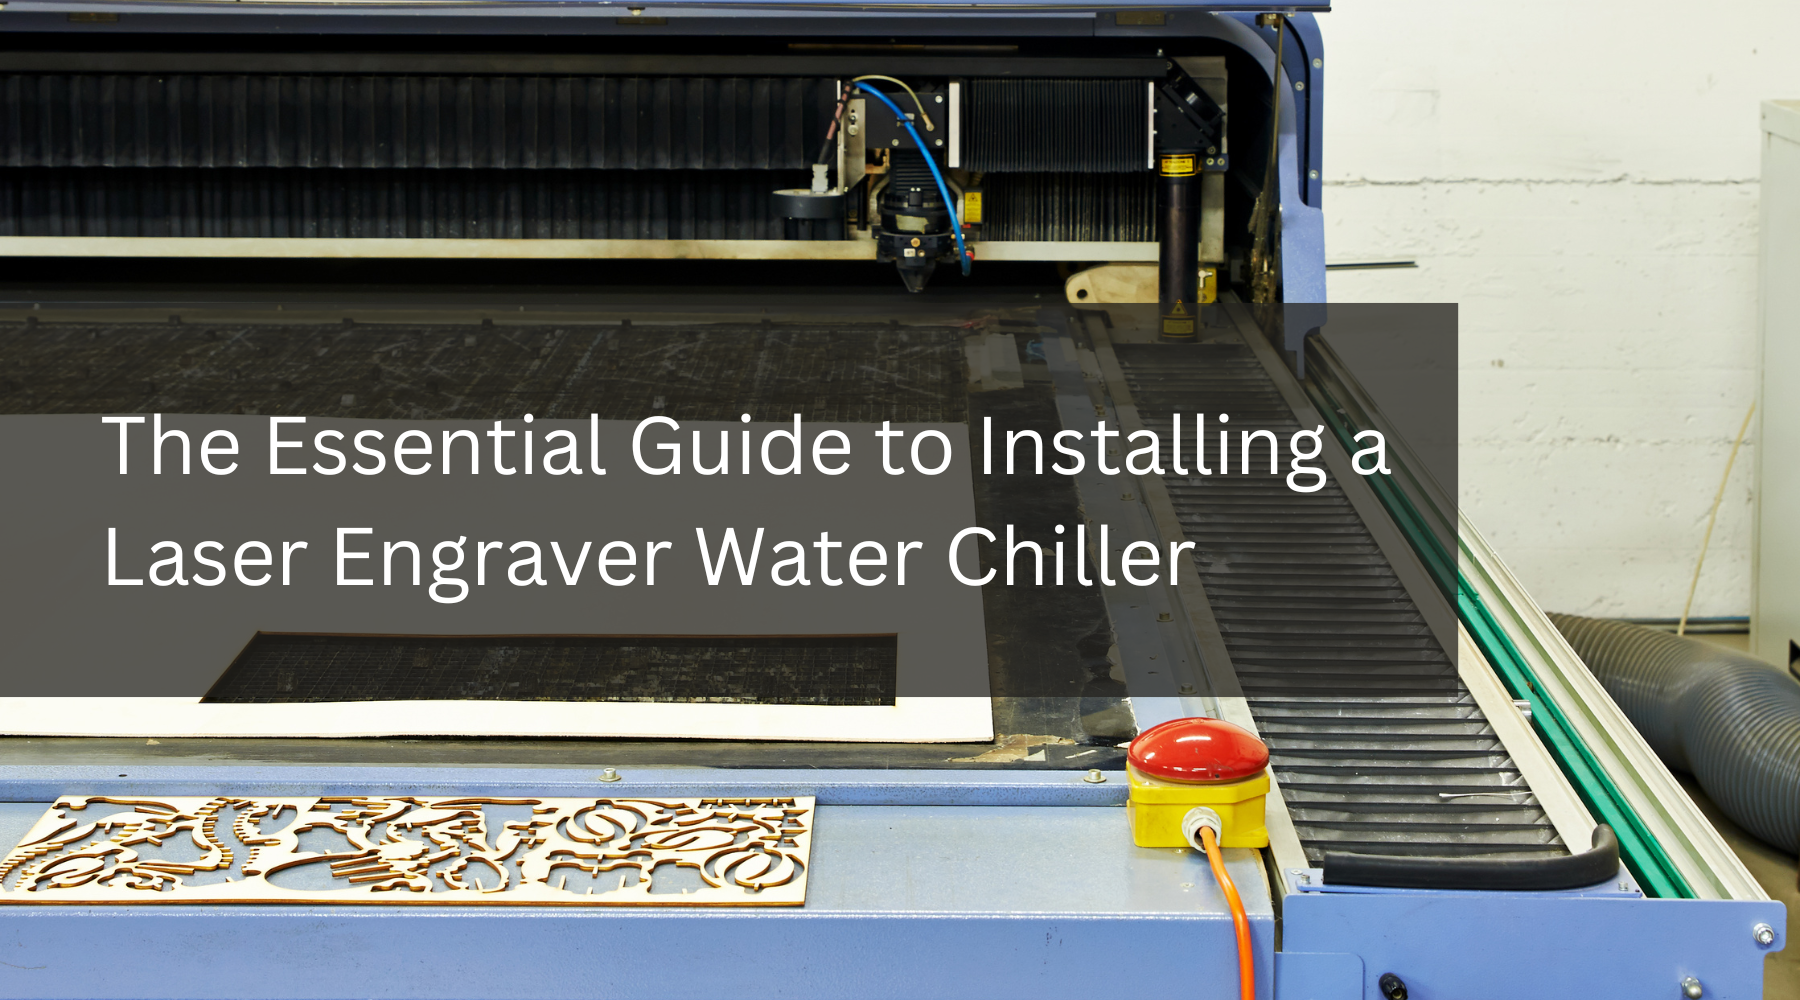 The Essential Guide to Installing a Laser Engraver Water Chiller